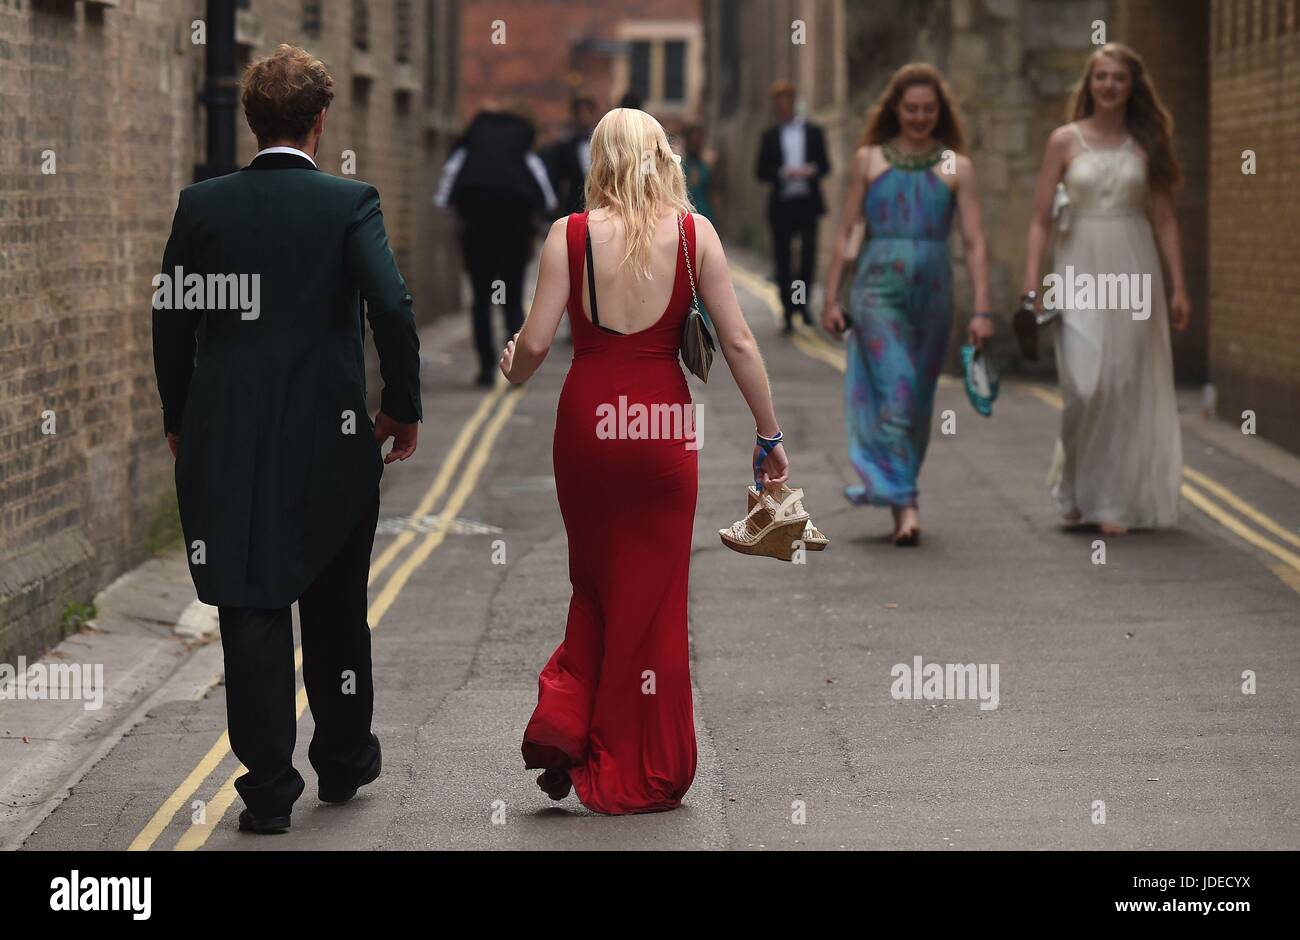 Students make their way home after attending a May Ball at Cambridge University which is the traditional celebration to mark the end of the academic year. Stock Photo